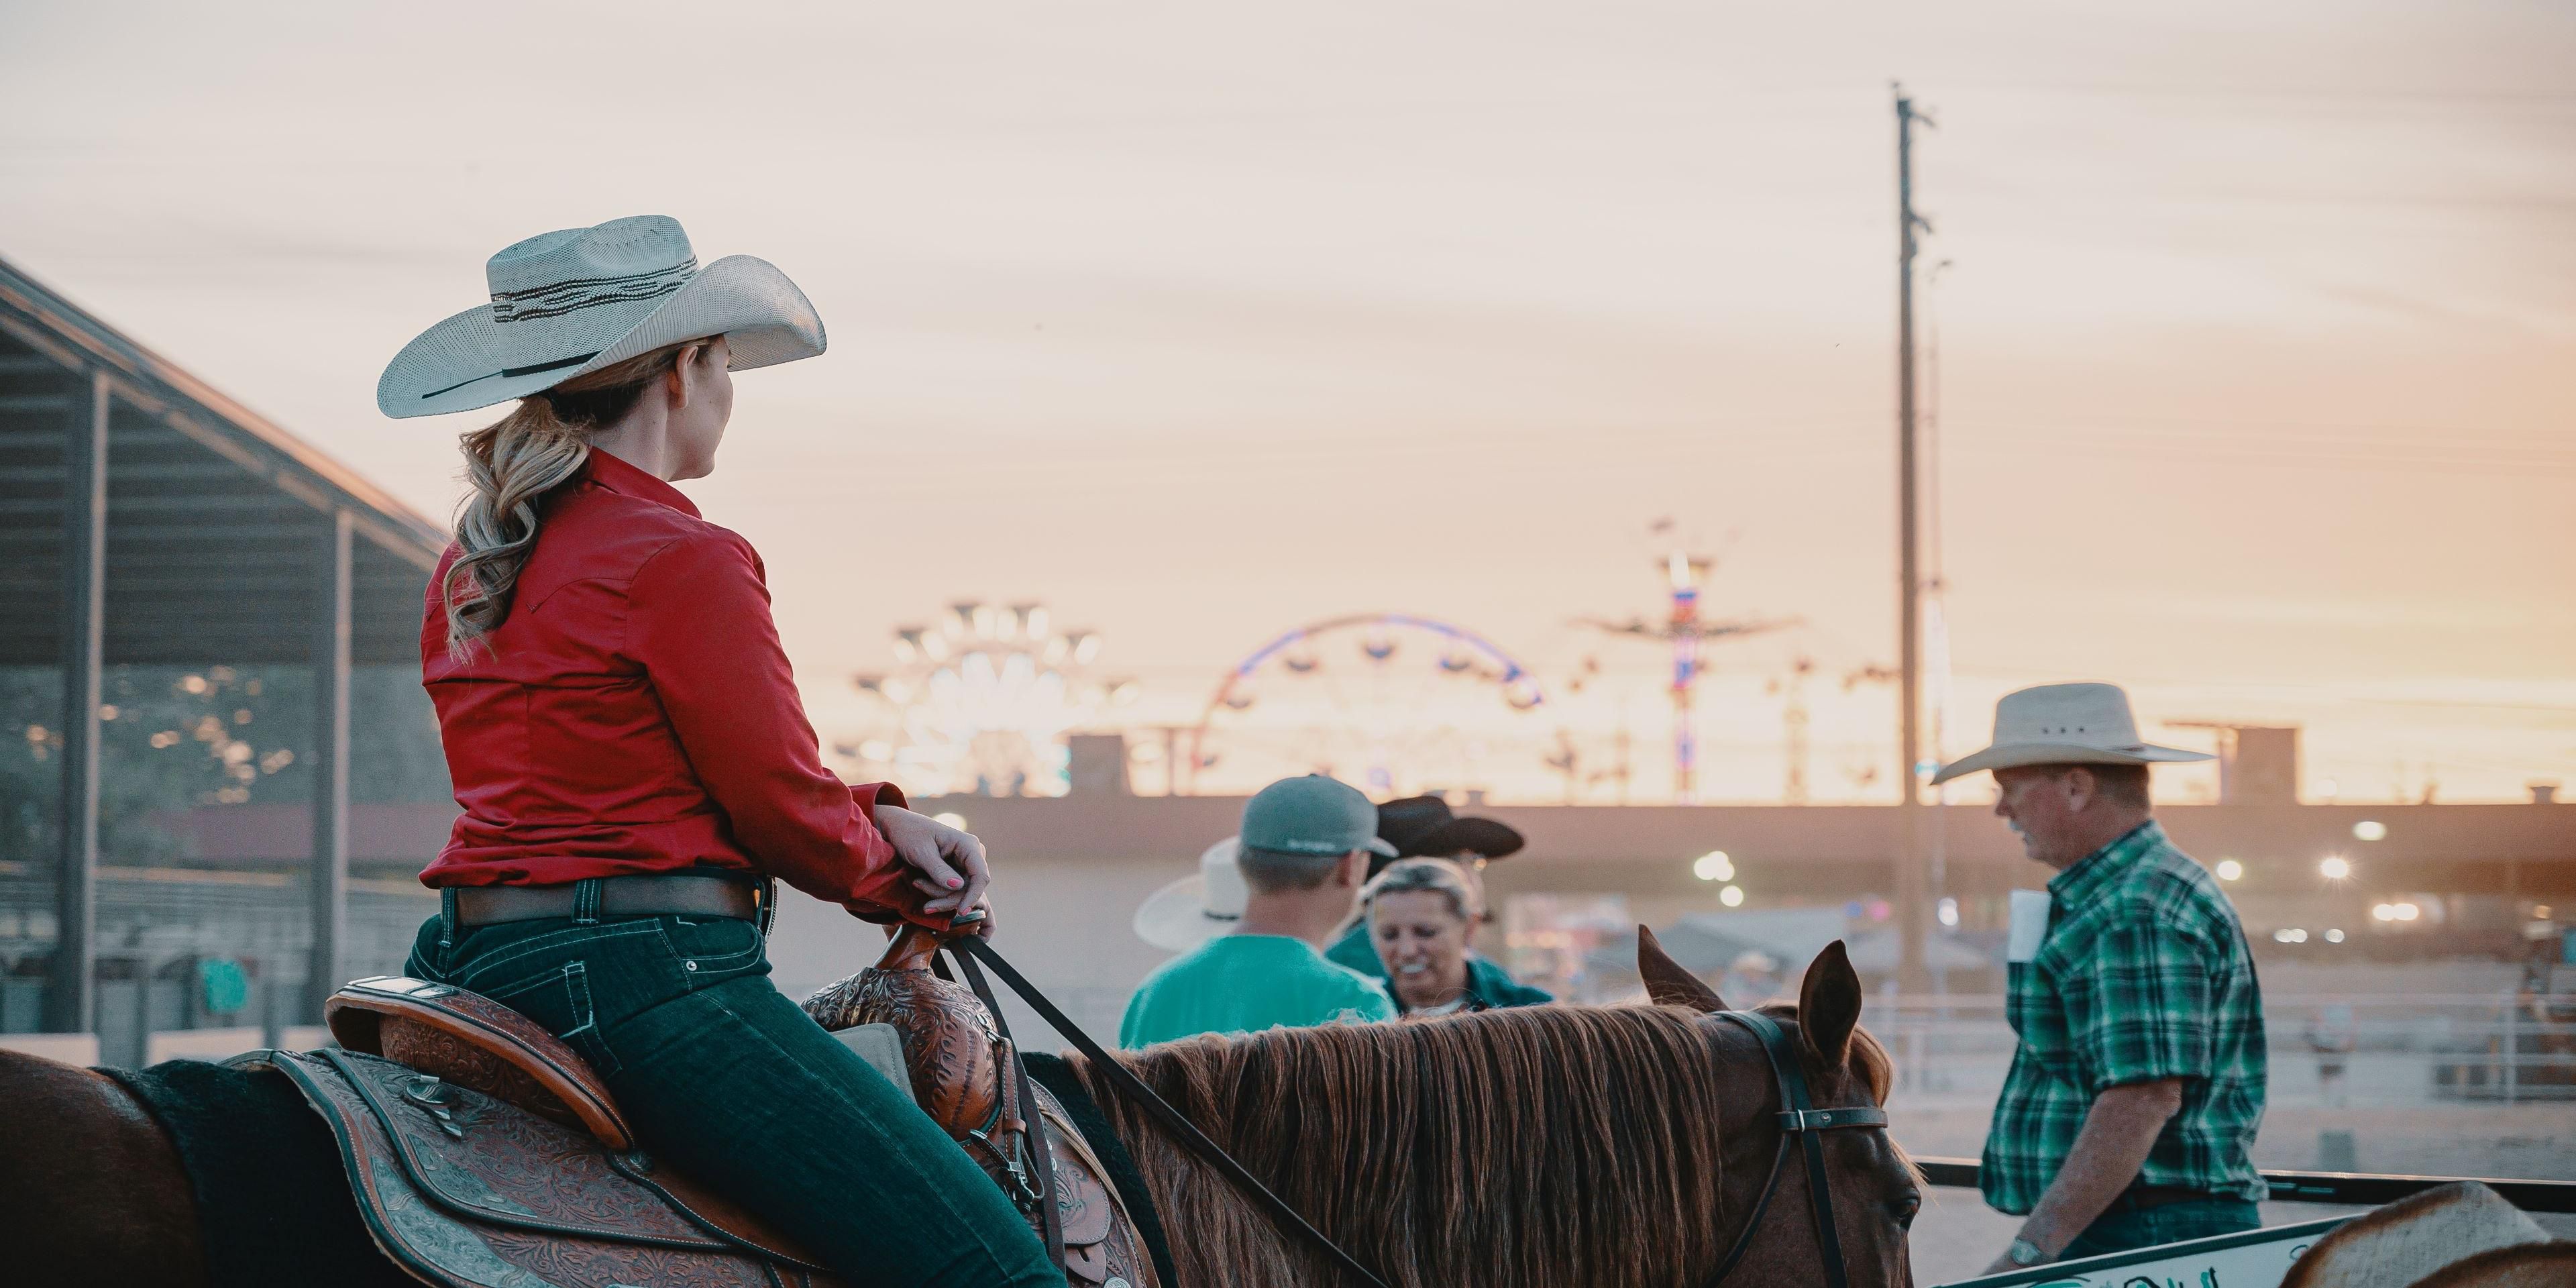 Attending a rodeo or event at the Fair Grounds?  Our location is ideally located with close proximity to event location and easy interstate access.  